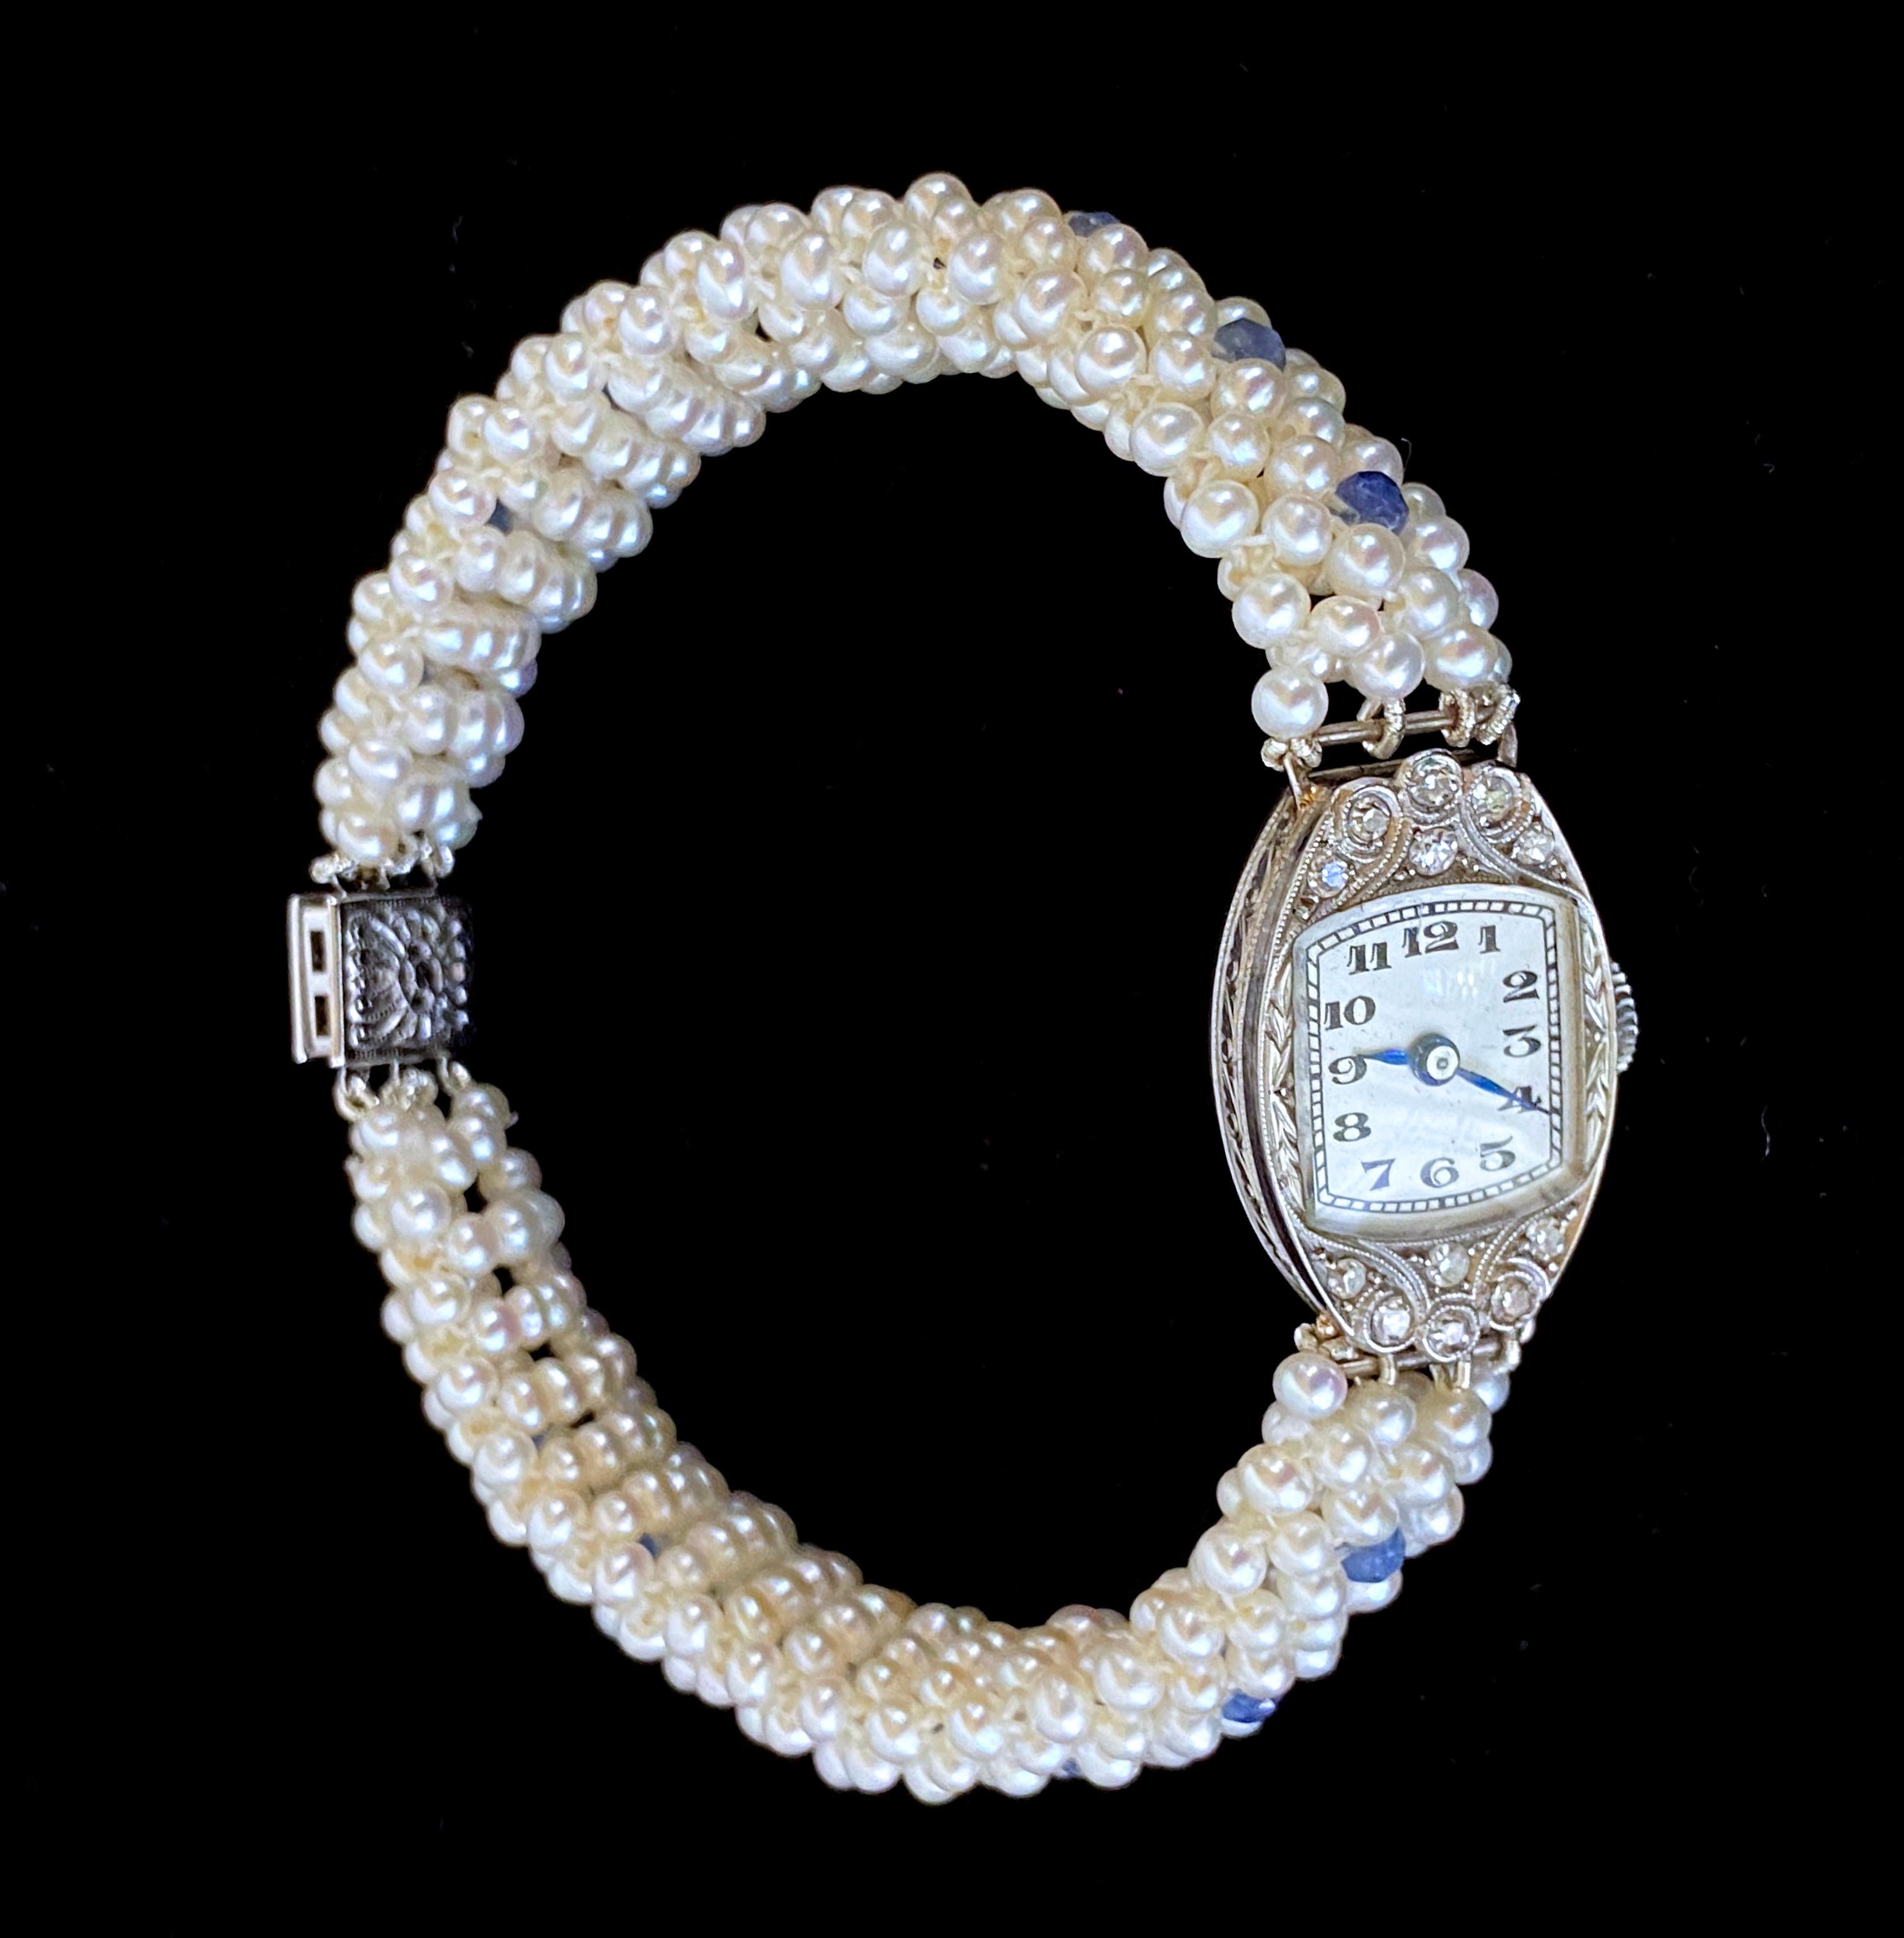 Beautiful One of A Kind piece by Marina J. A vintage working manual Diamond studded French Platinum watch is reworked into a gorgeous Pearl and Sapphire bracelet - marked M.E.W. 8-1-55 on the back as shown in photos. This unique watch piece features